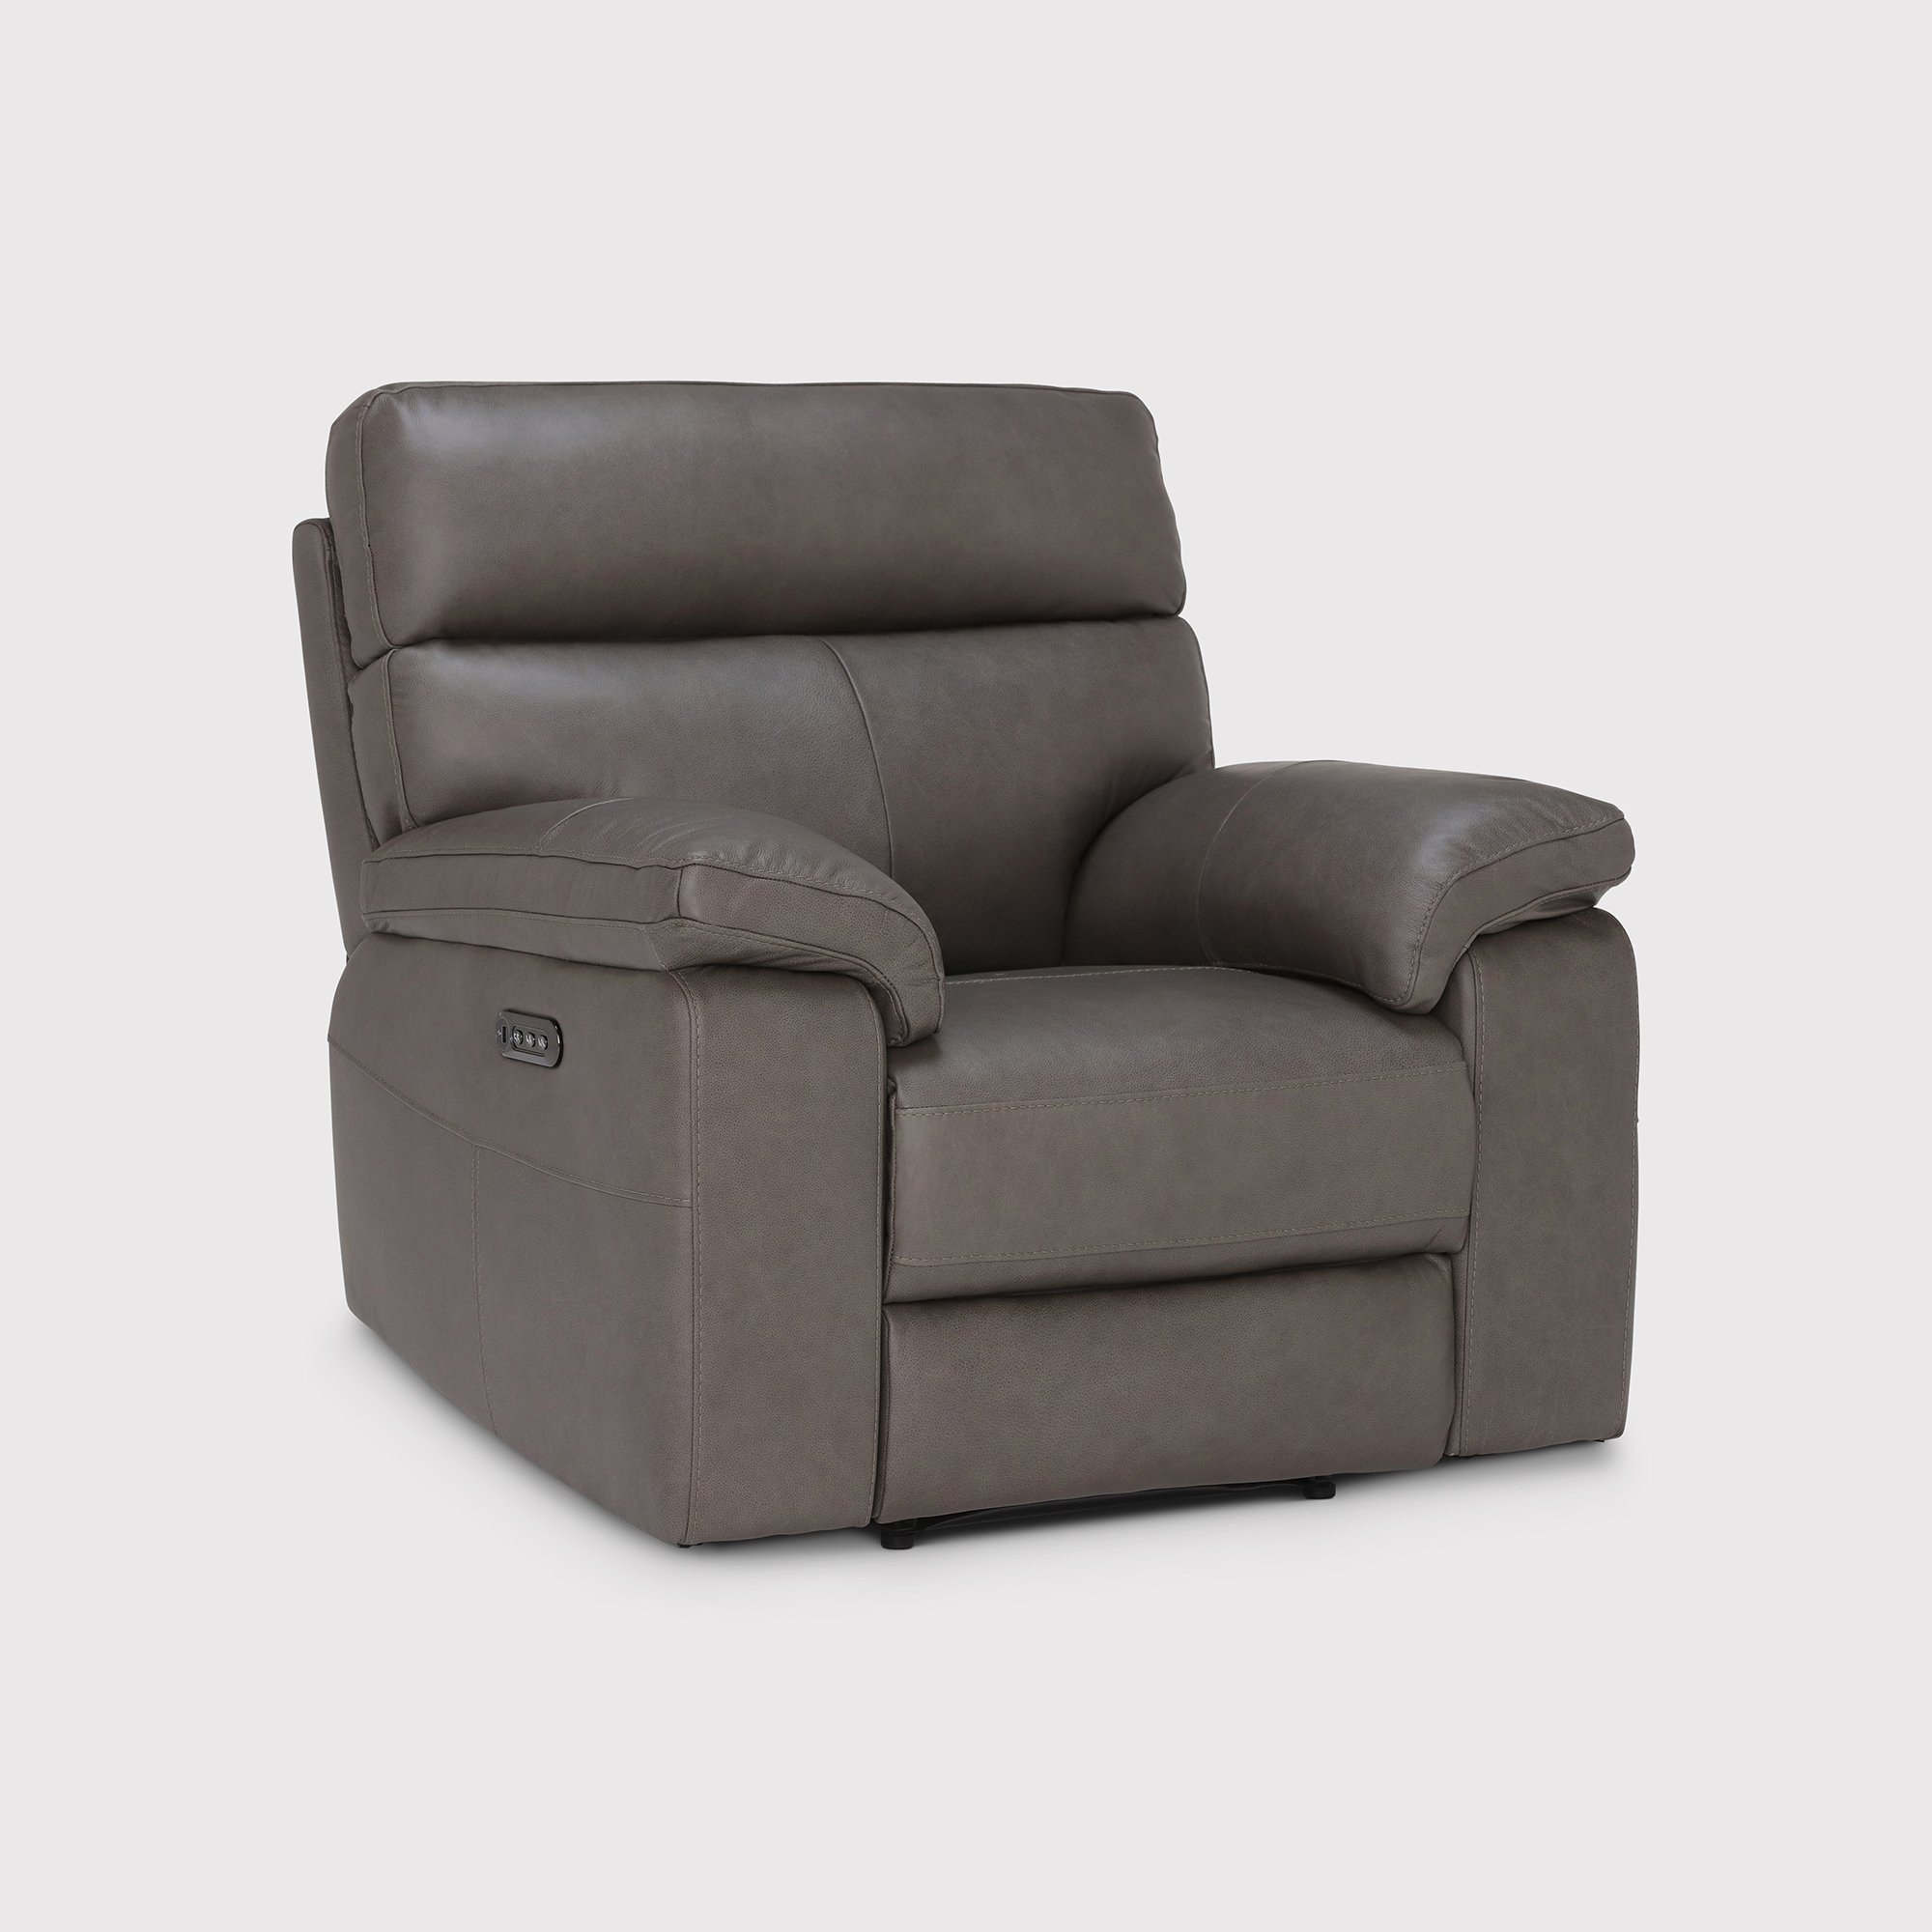 Clark Armchair With Power Motion Recliner, Brown Leather | Barker & Stonehouse